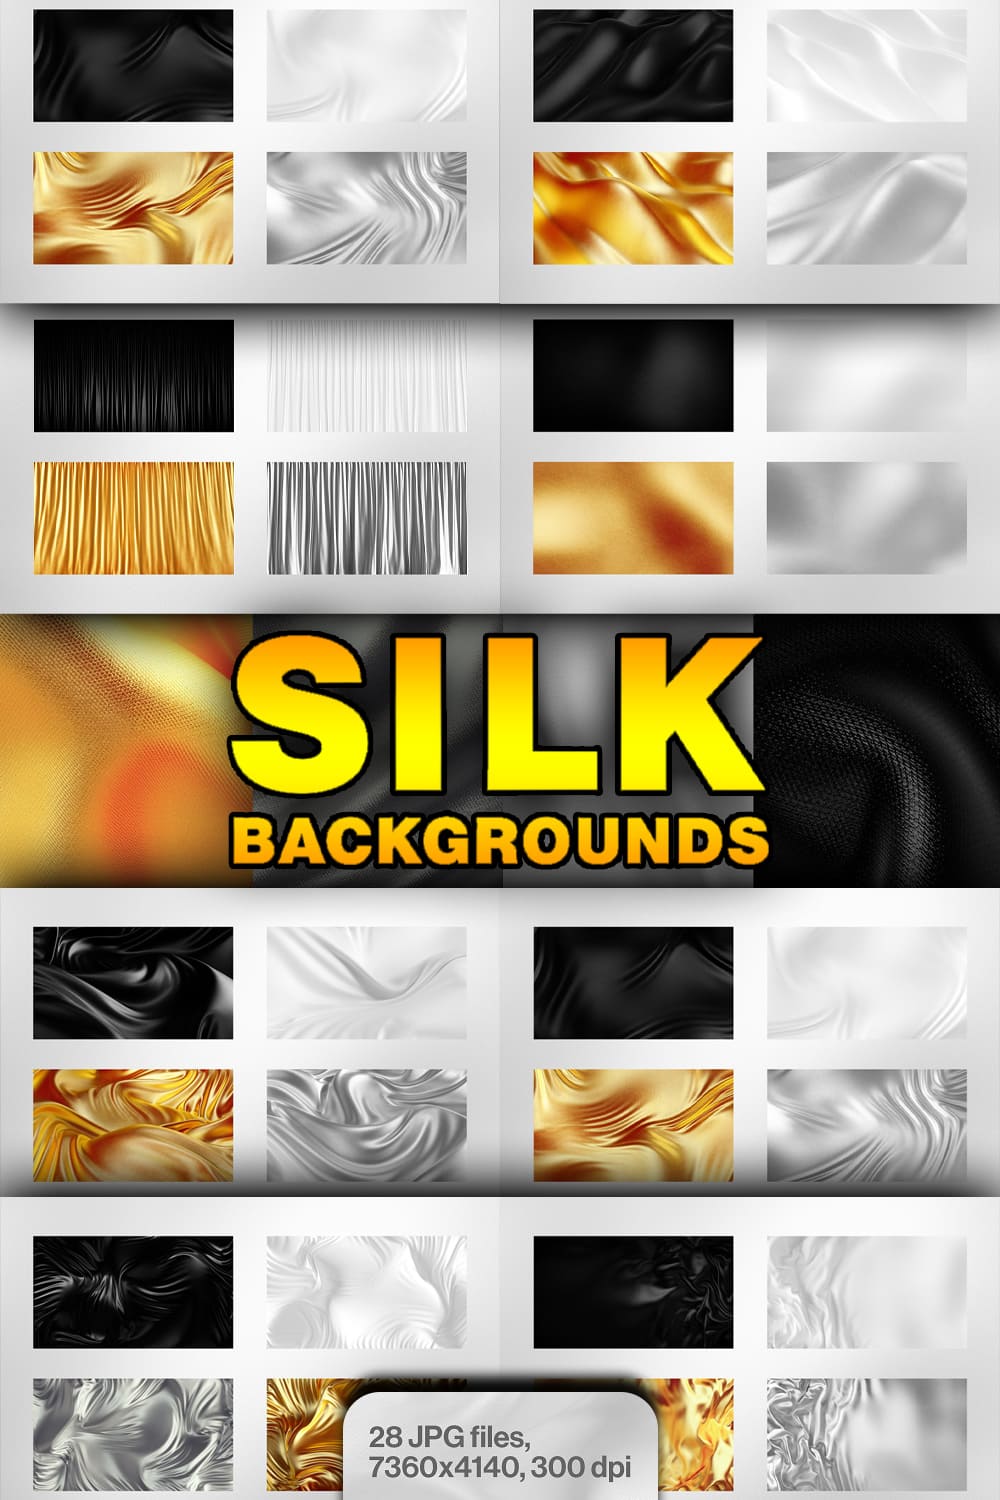 Silk backgrounds - pinterest image preview.